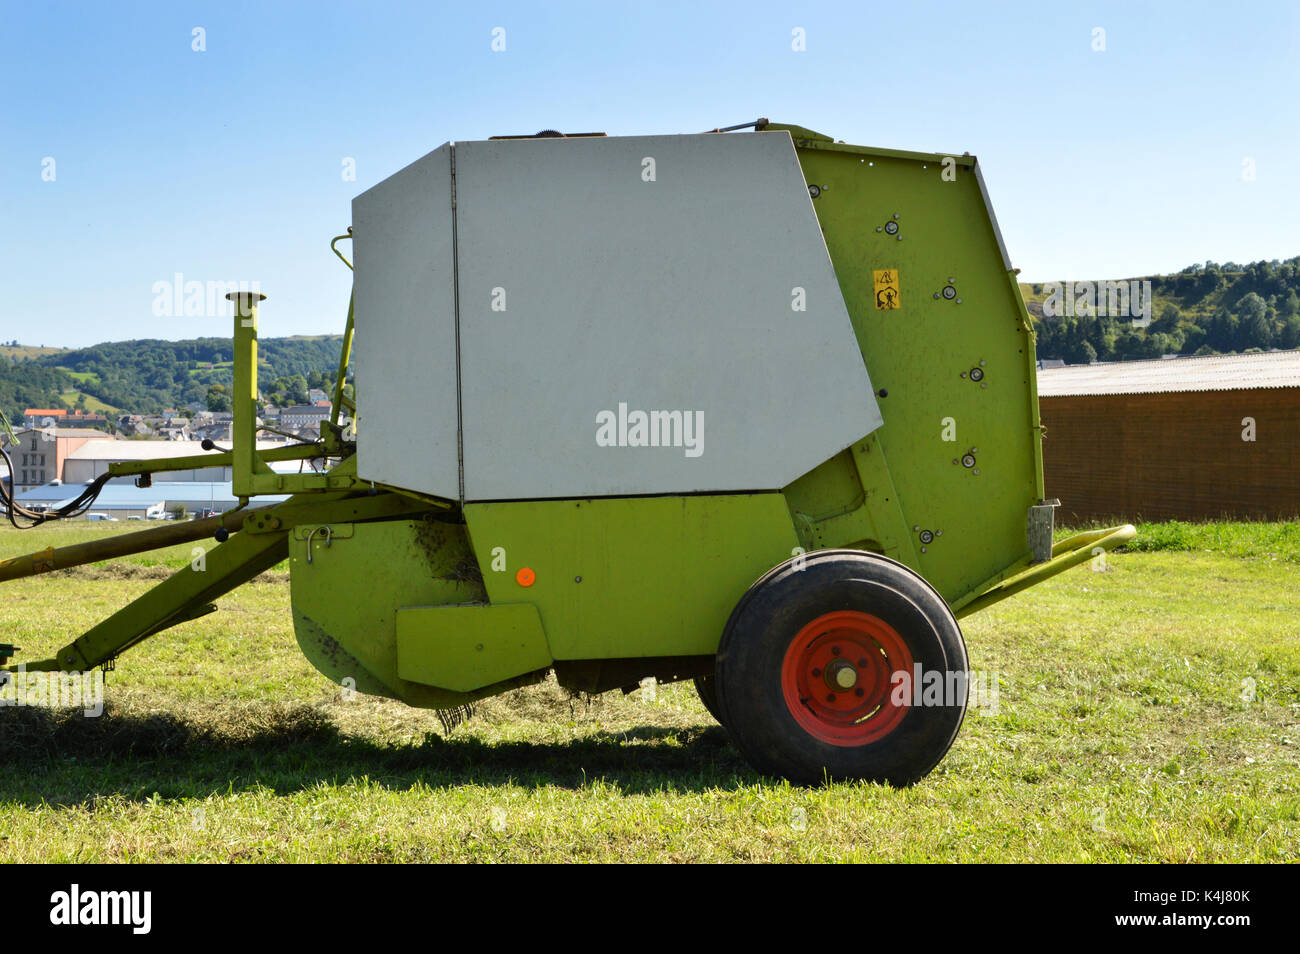 A baler type agricultural equipment, to make straw or hay bales. Stock Photo